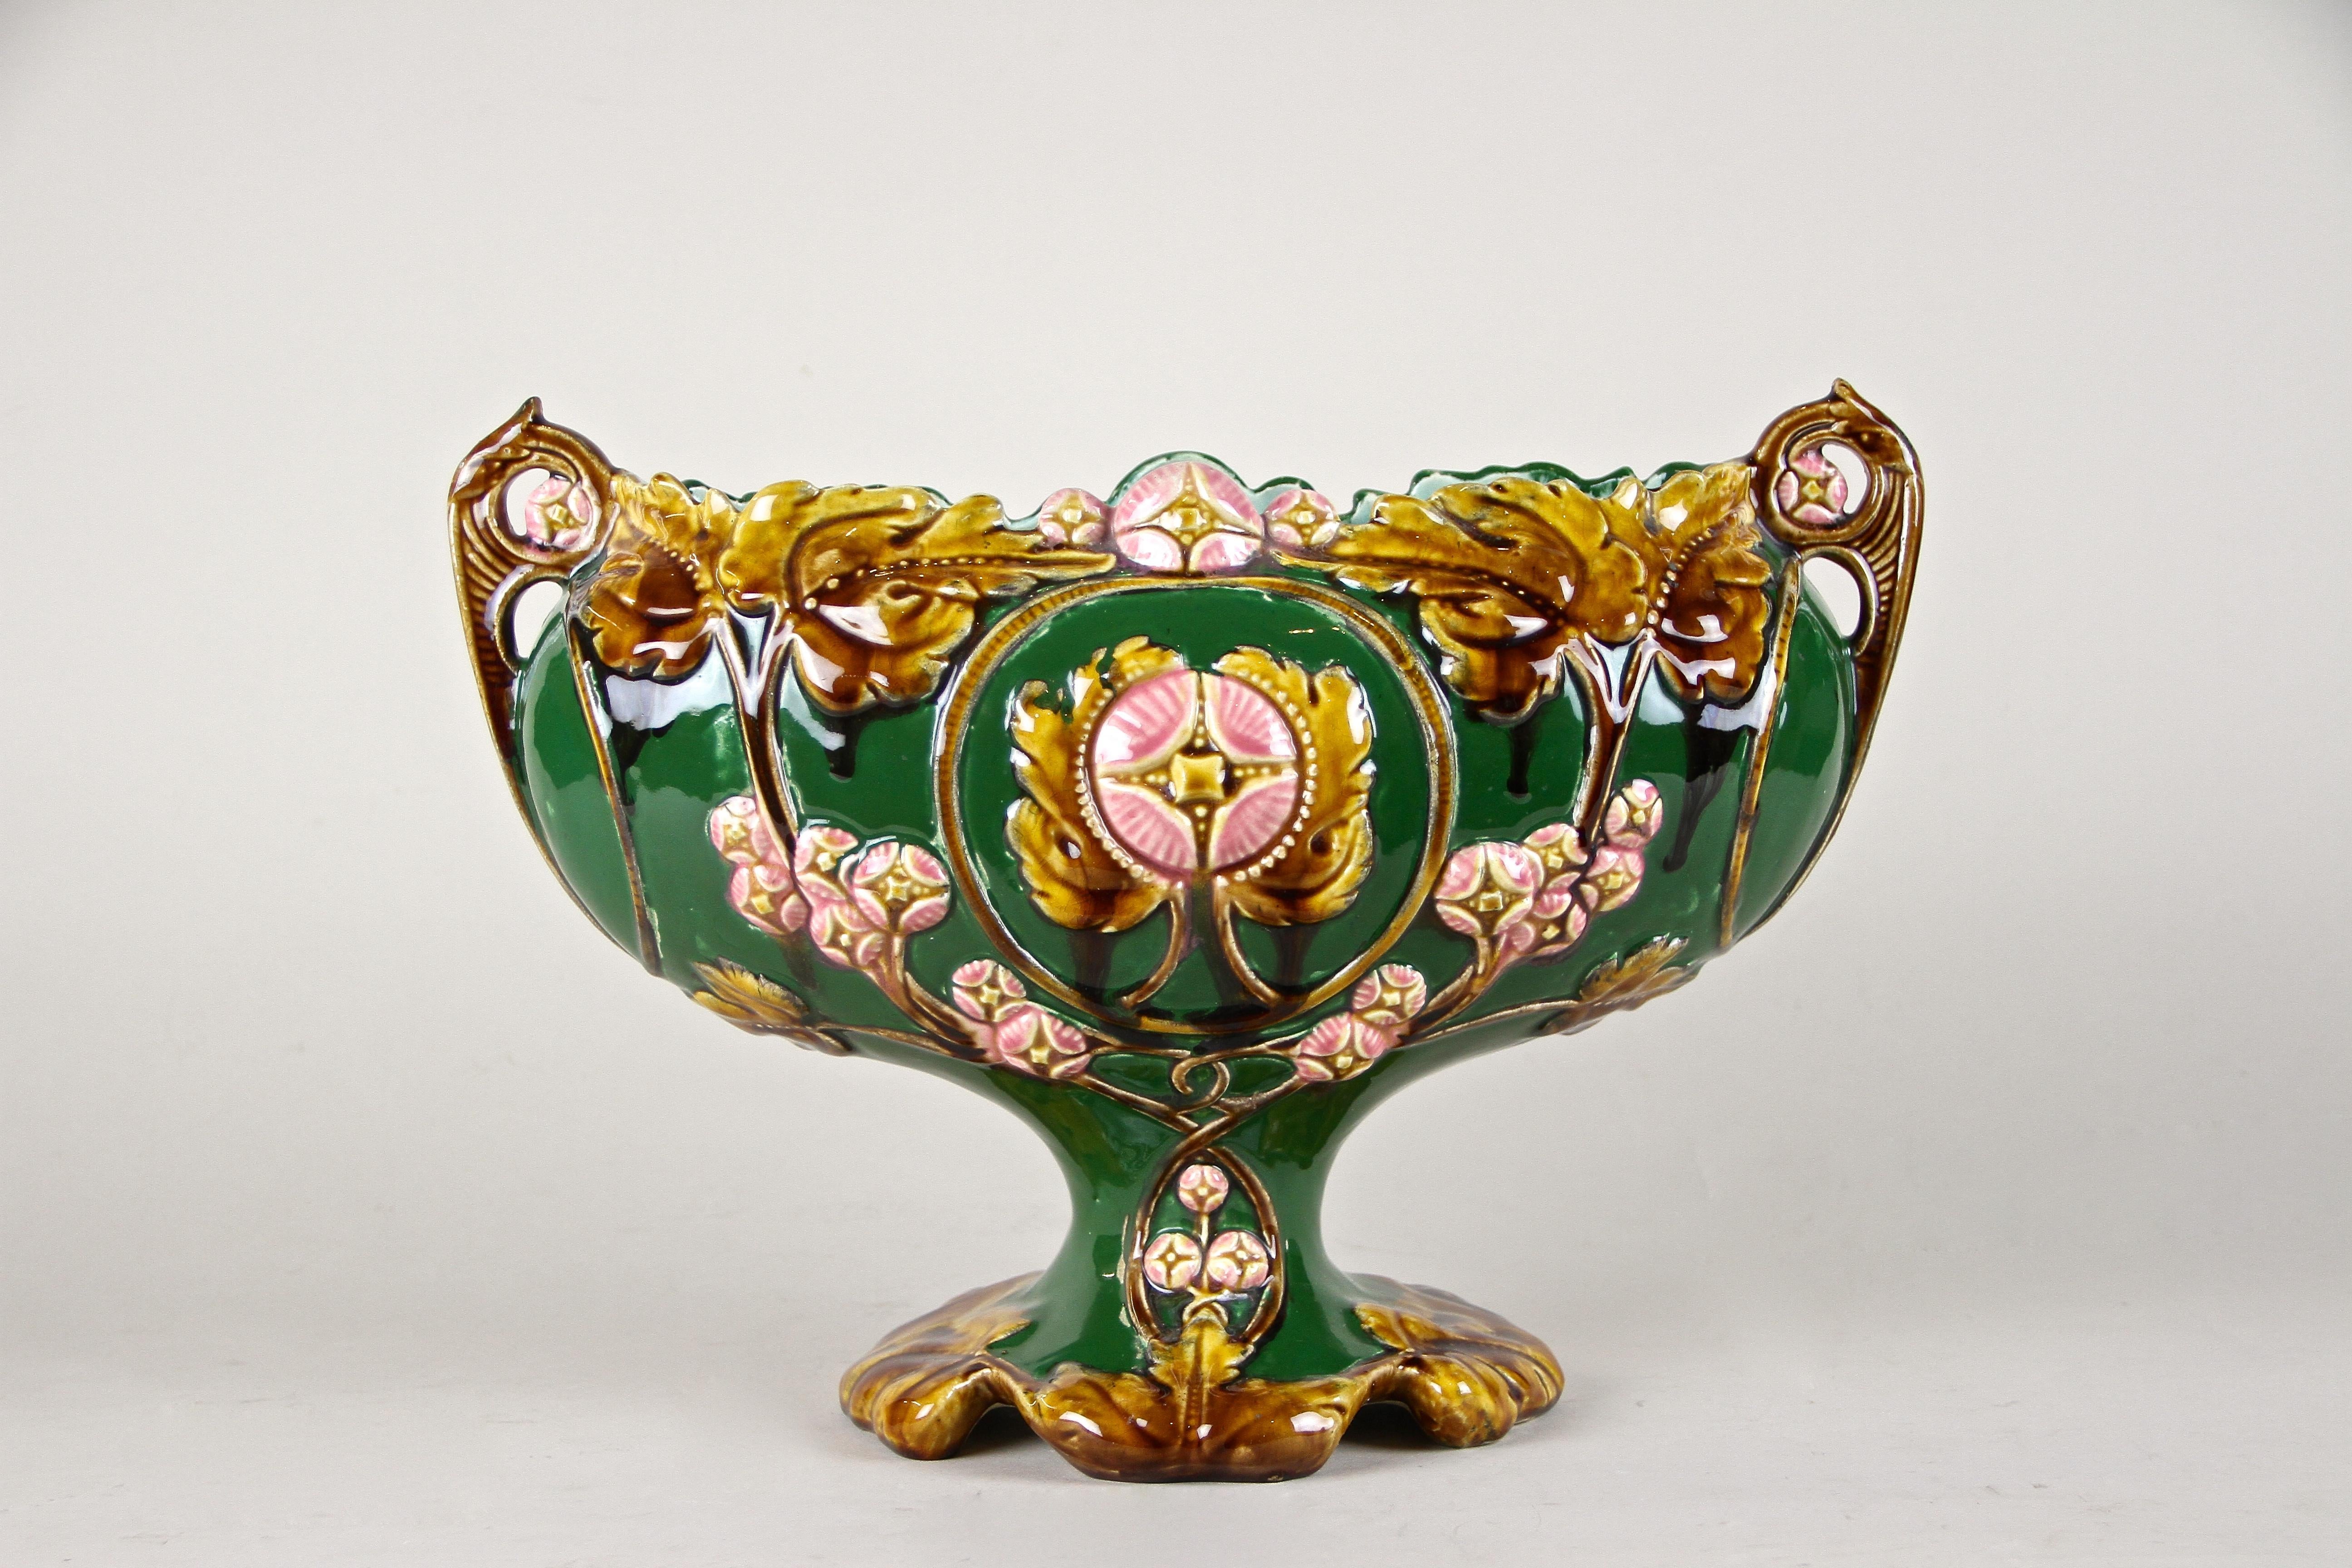 Large Majolica jardinière out of France from the early Art Nouveau period circa 1900. The beautiful designed green colored body impresses with an organic shape adorned by a floral theme, showing a lovely coloration in different green, brown, yellow